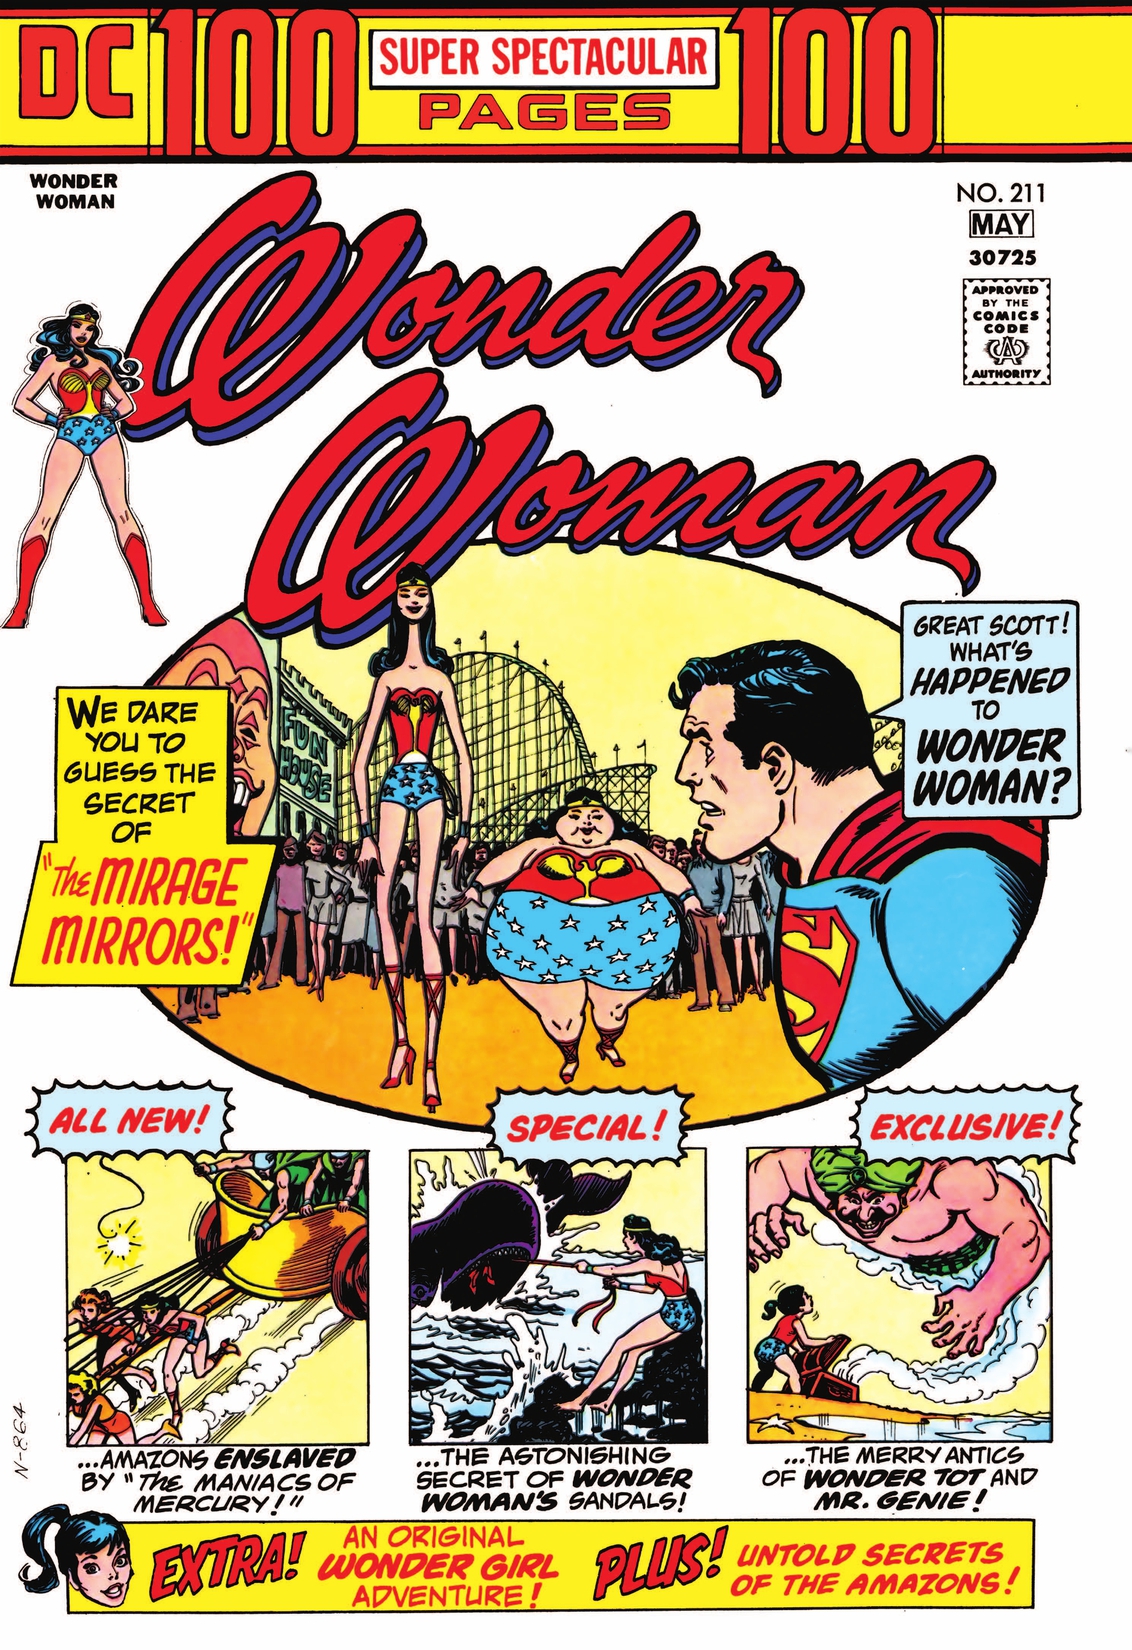 Wonder Woman (1942-1986) #211 preview images